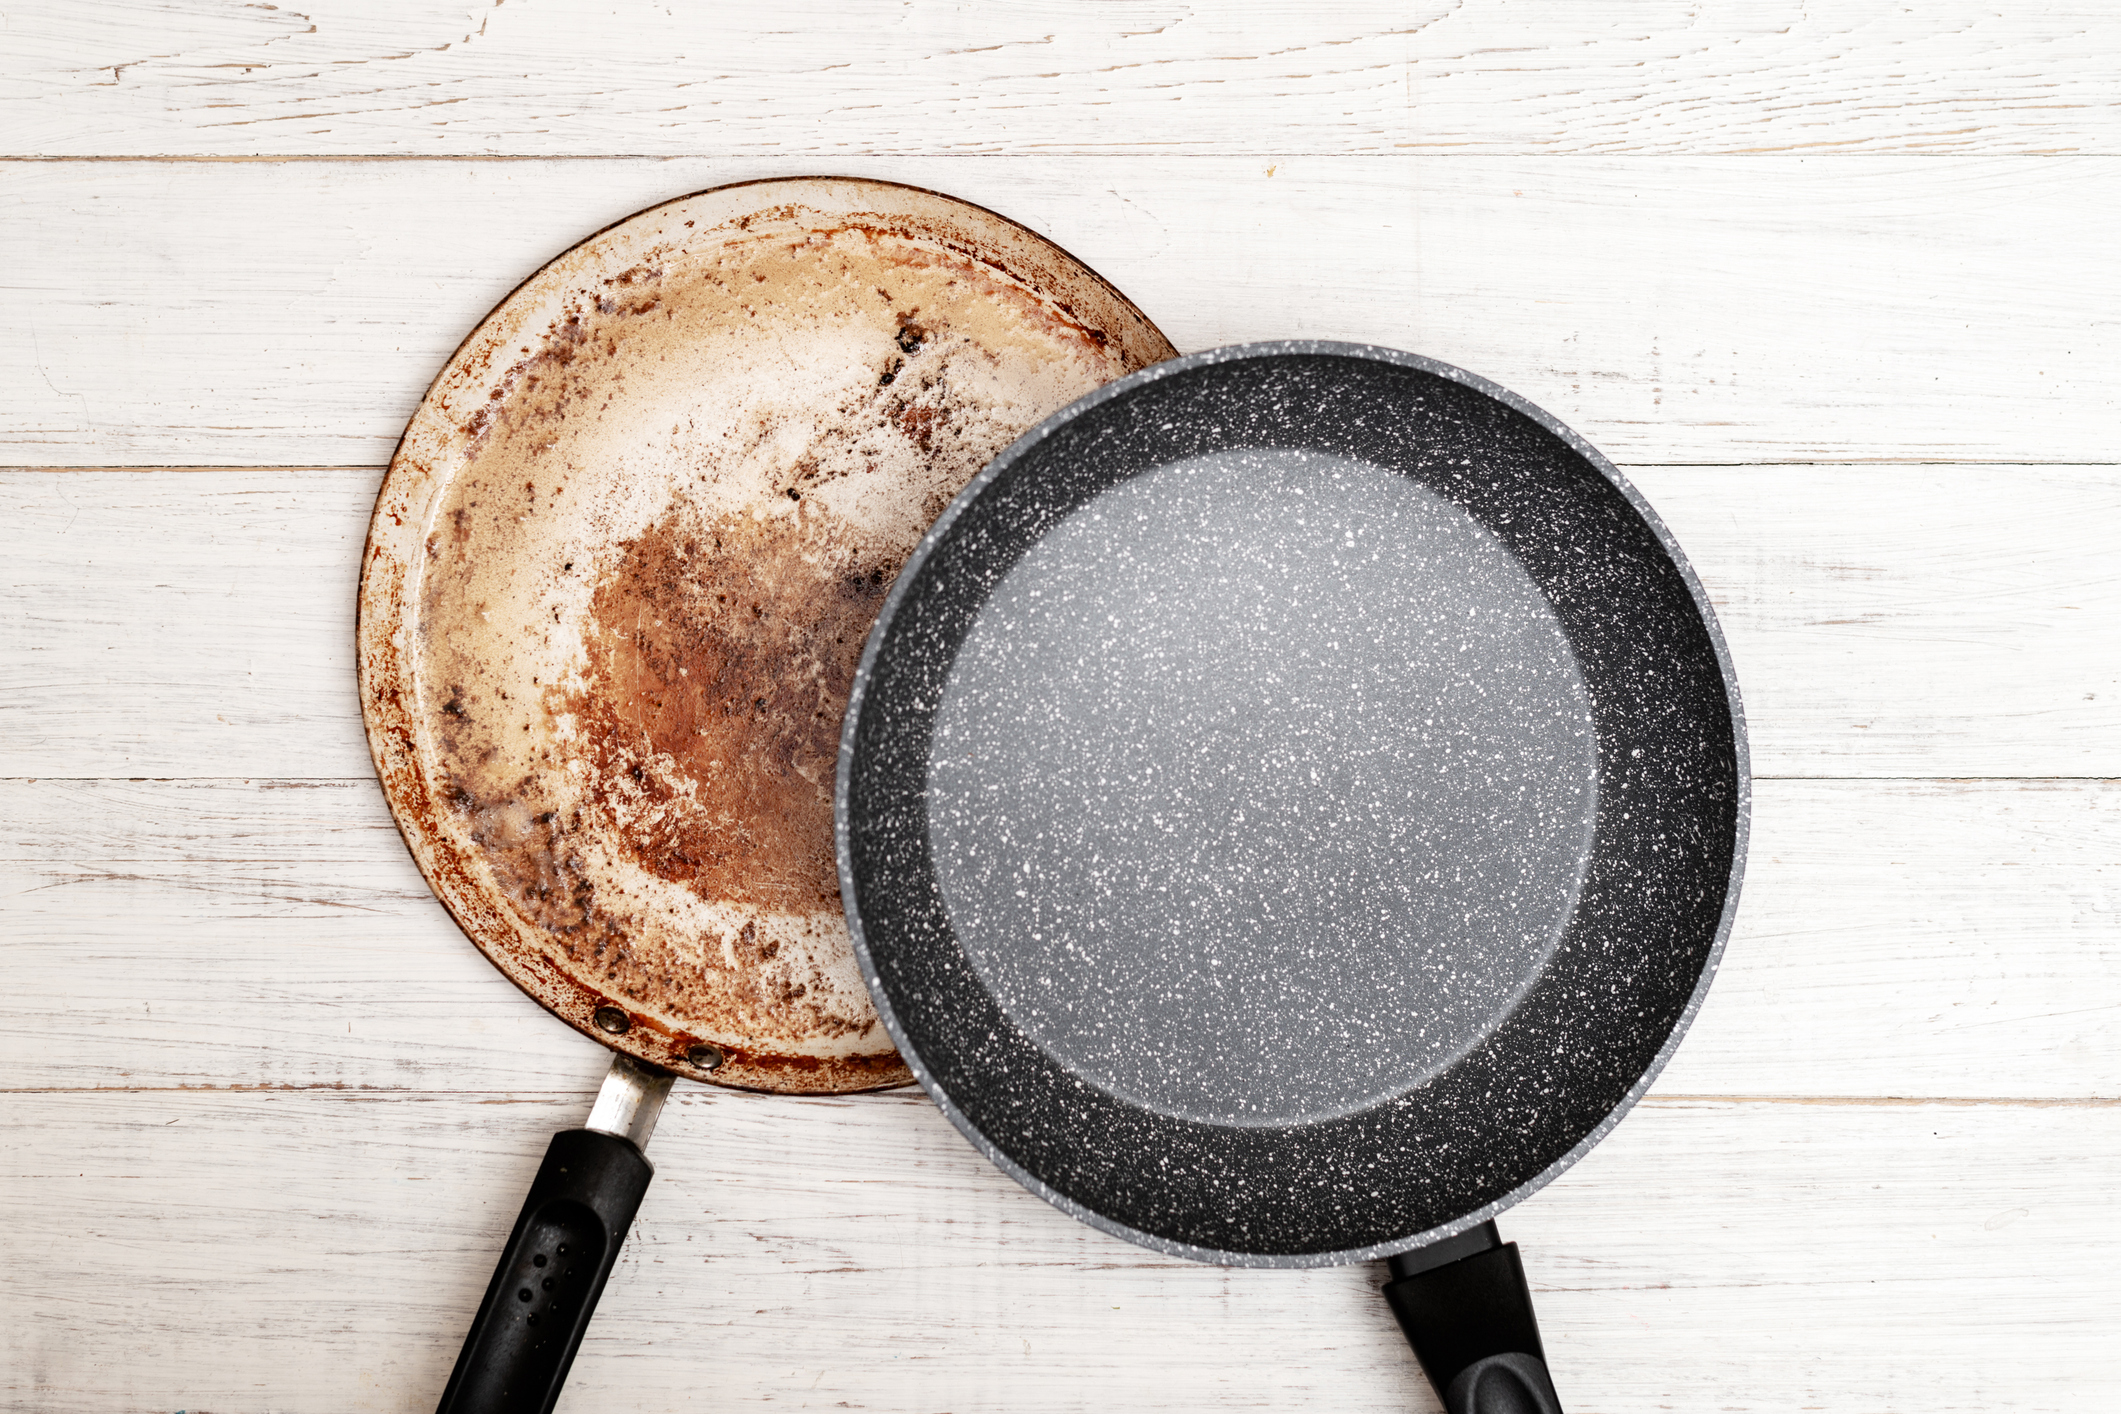 Worn-out non-stick cookware: Not just ugly — but toxic